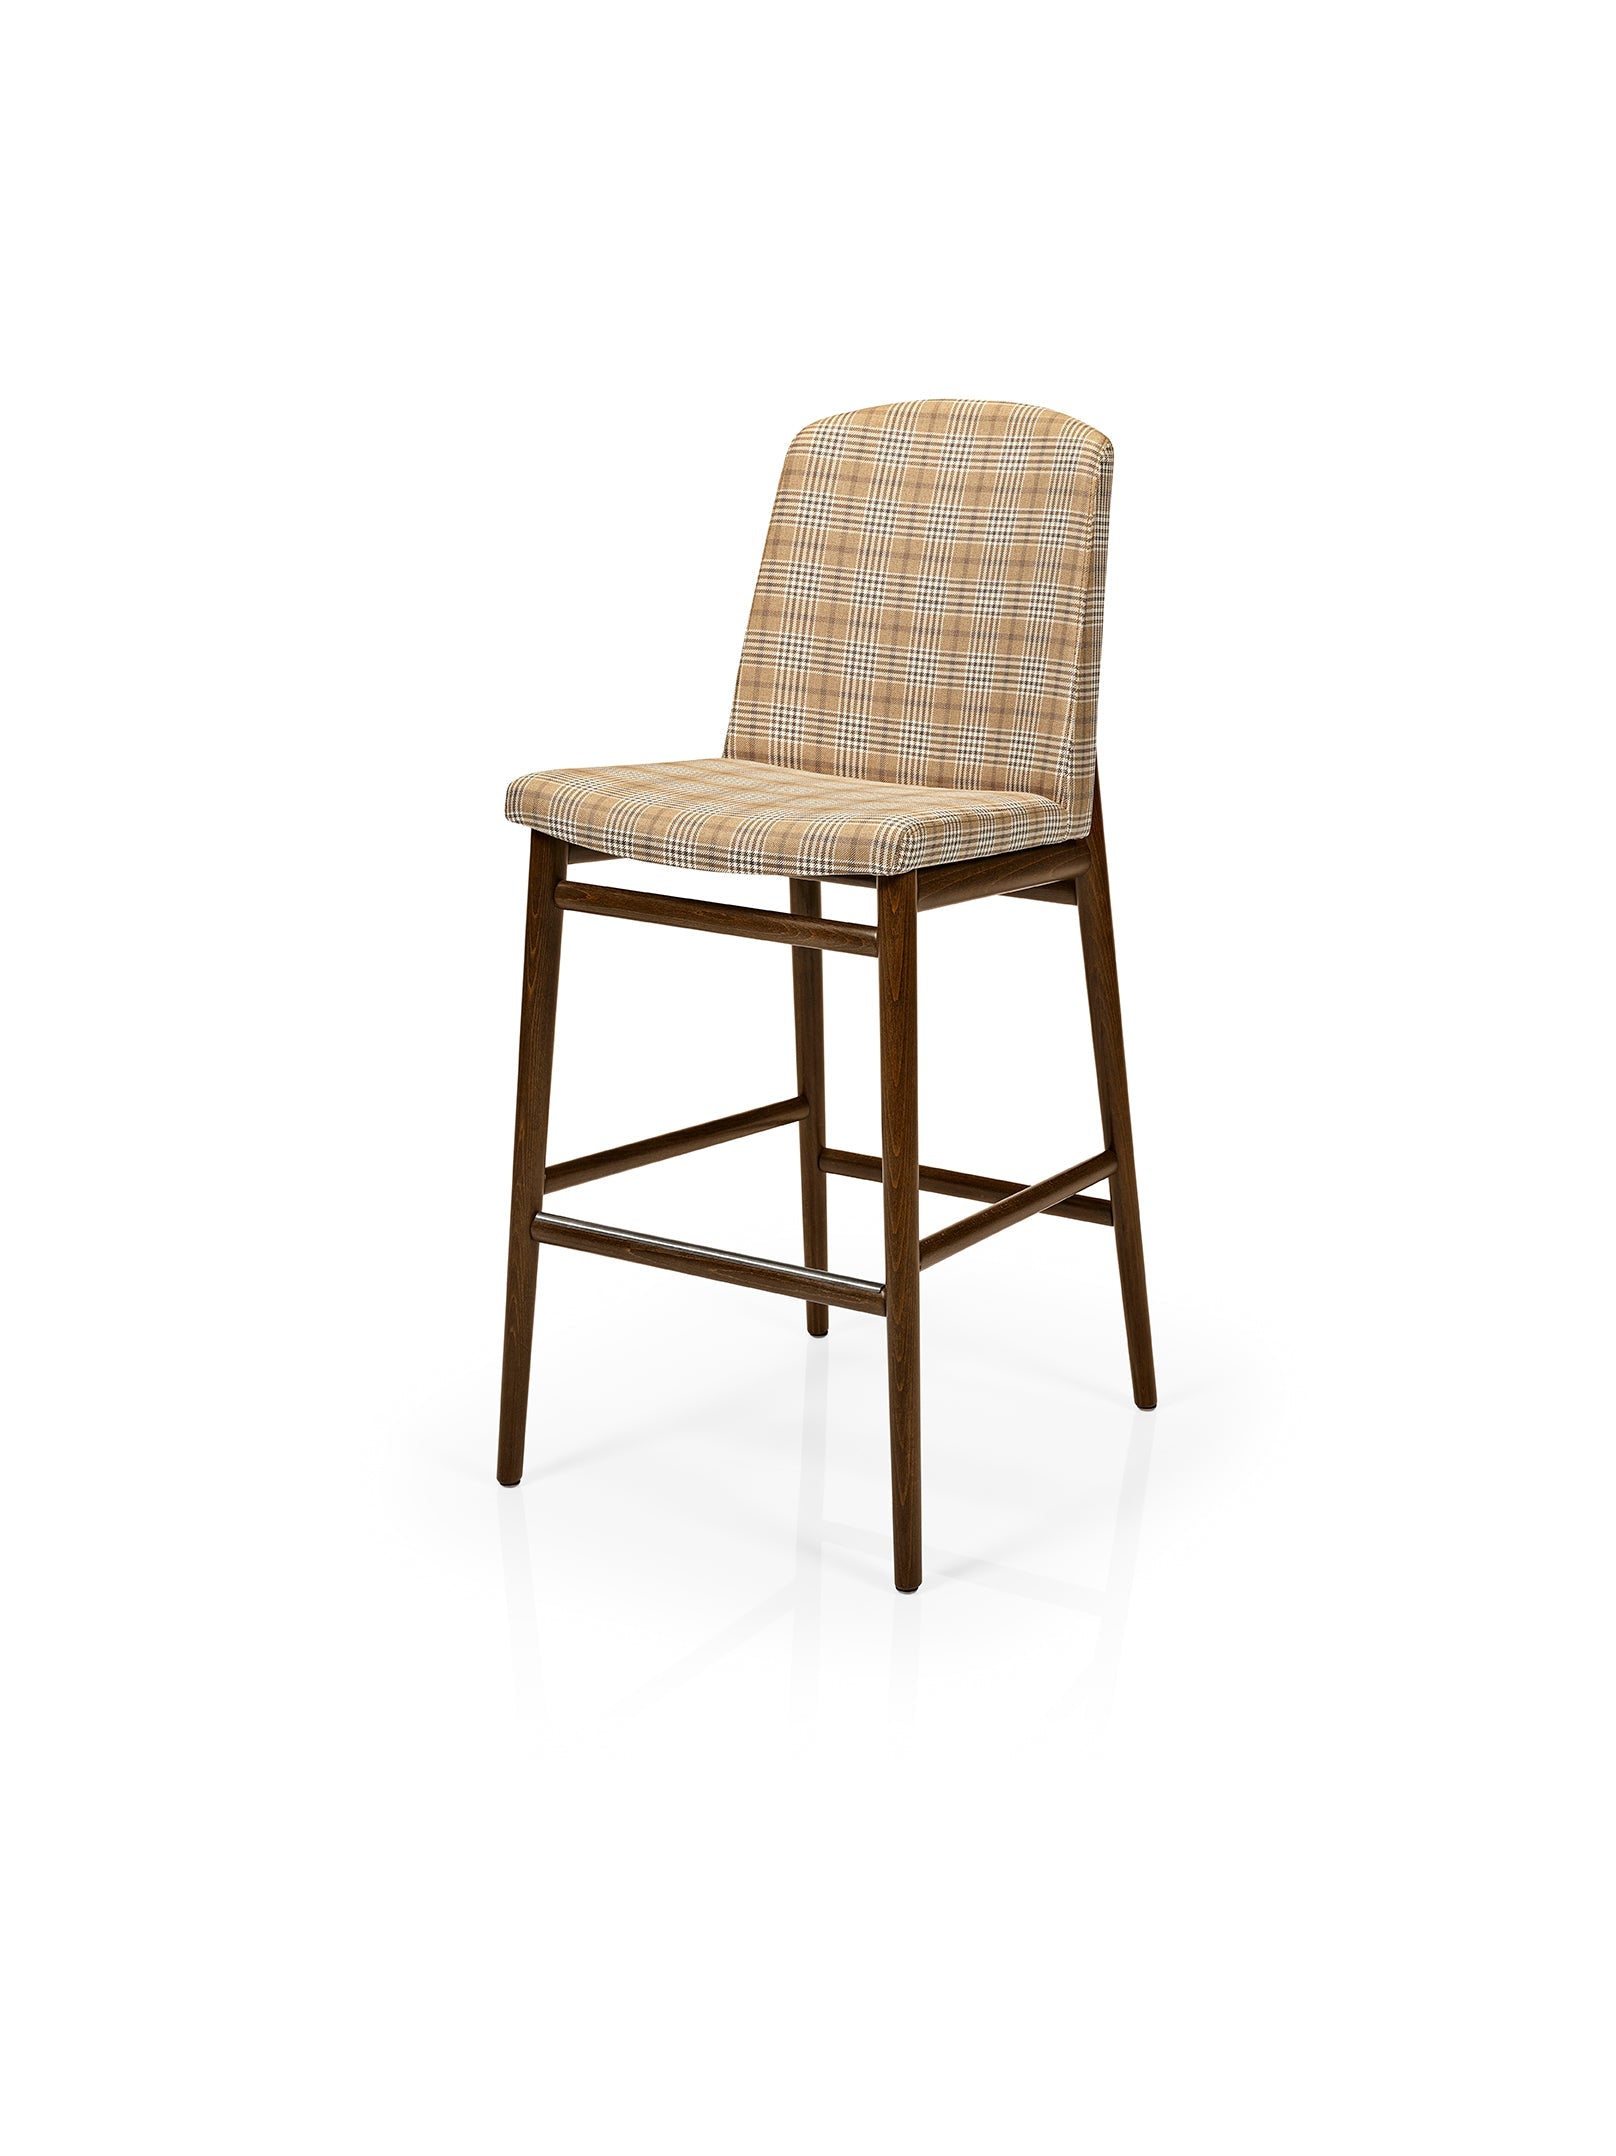 Zoe+ High Stool-More Contract-Contract Furniture Store